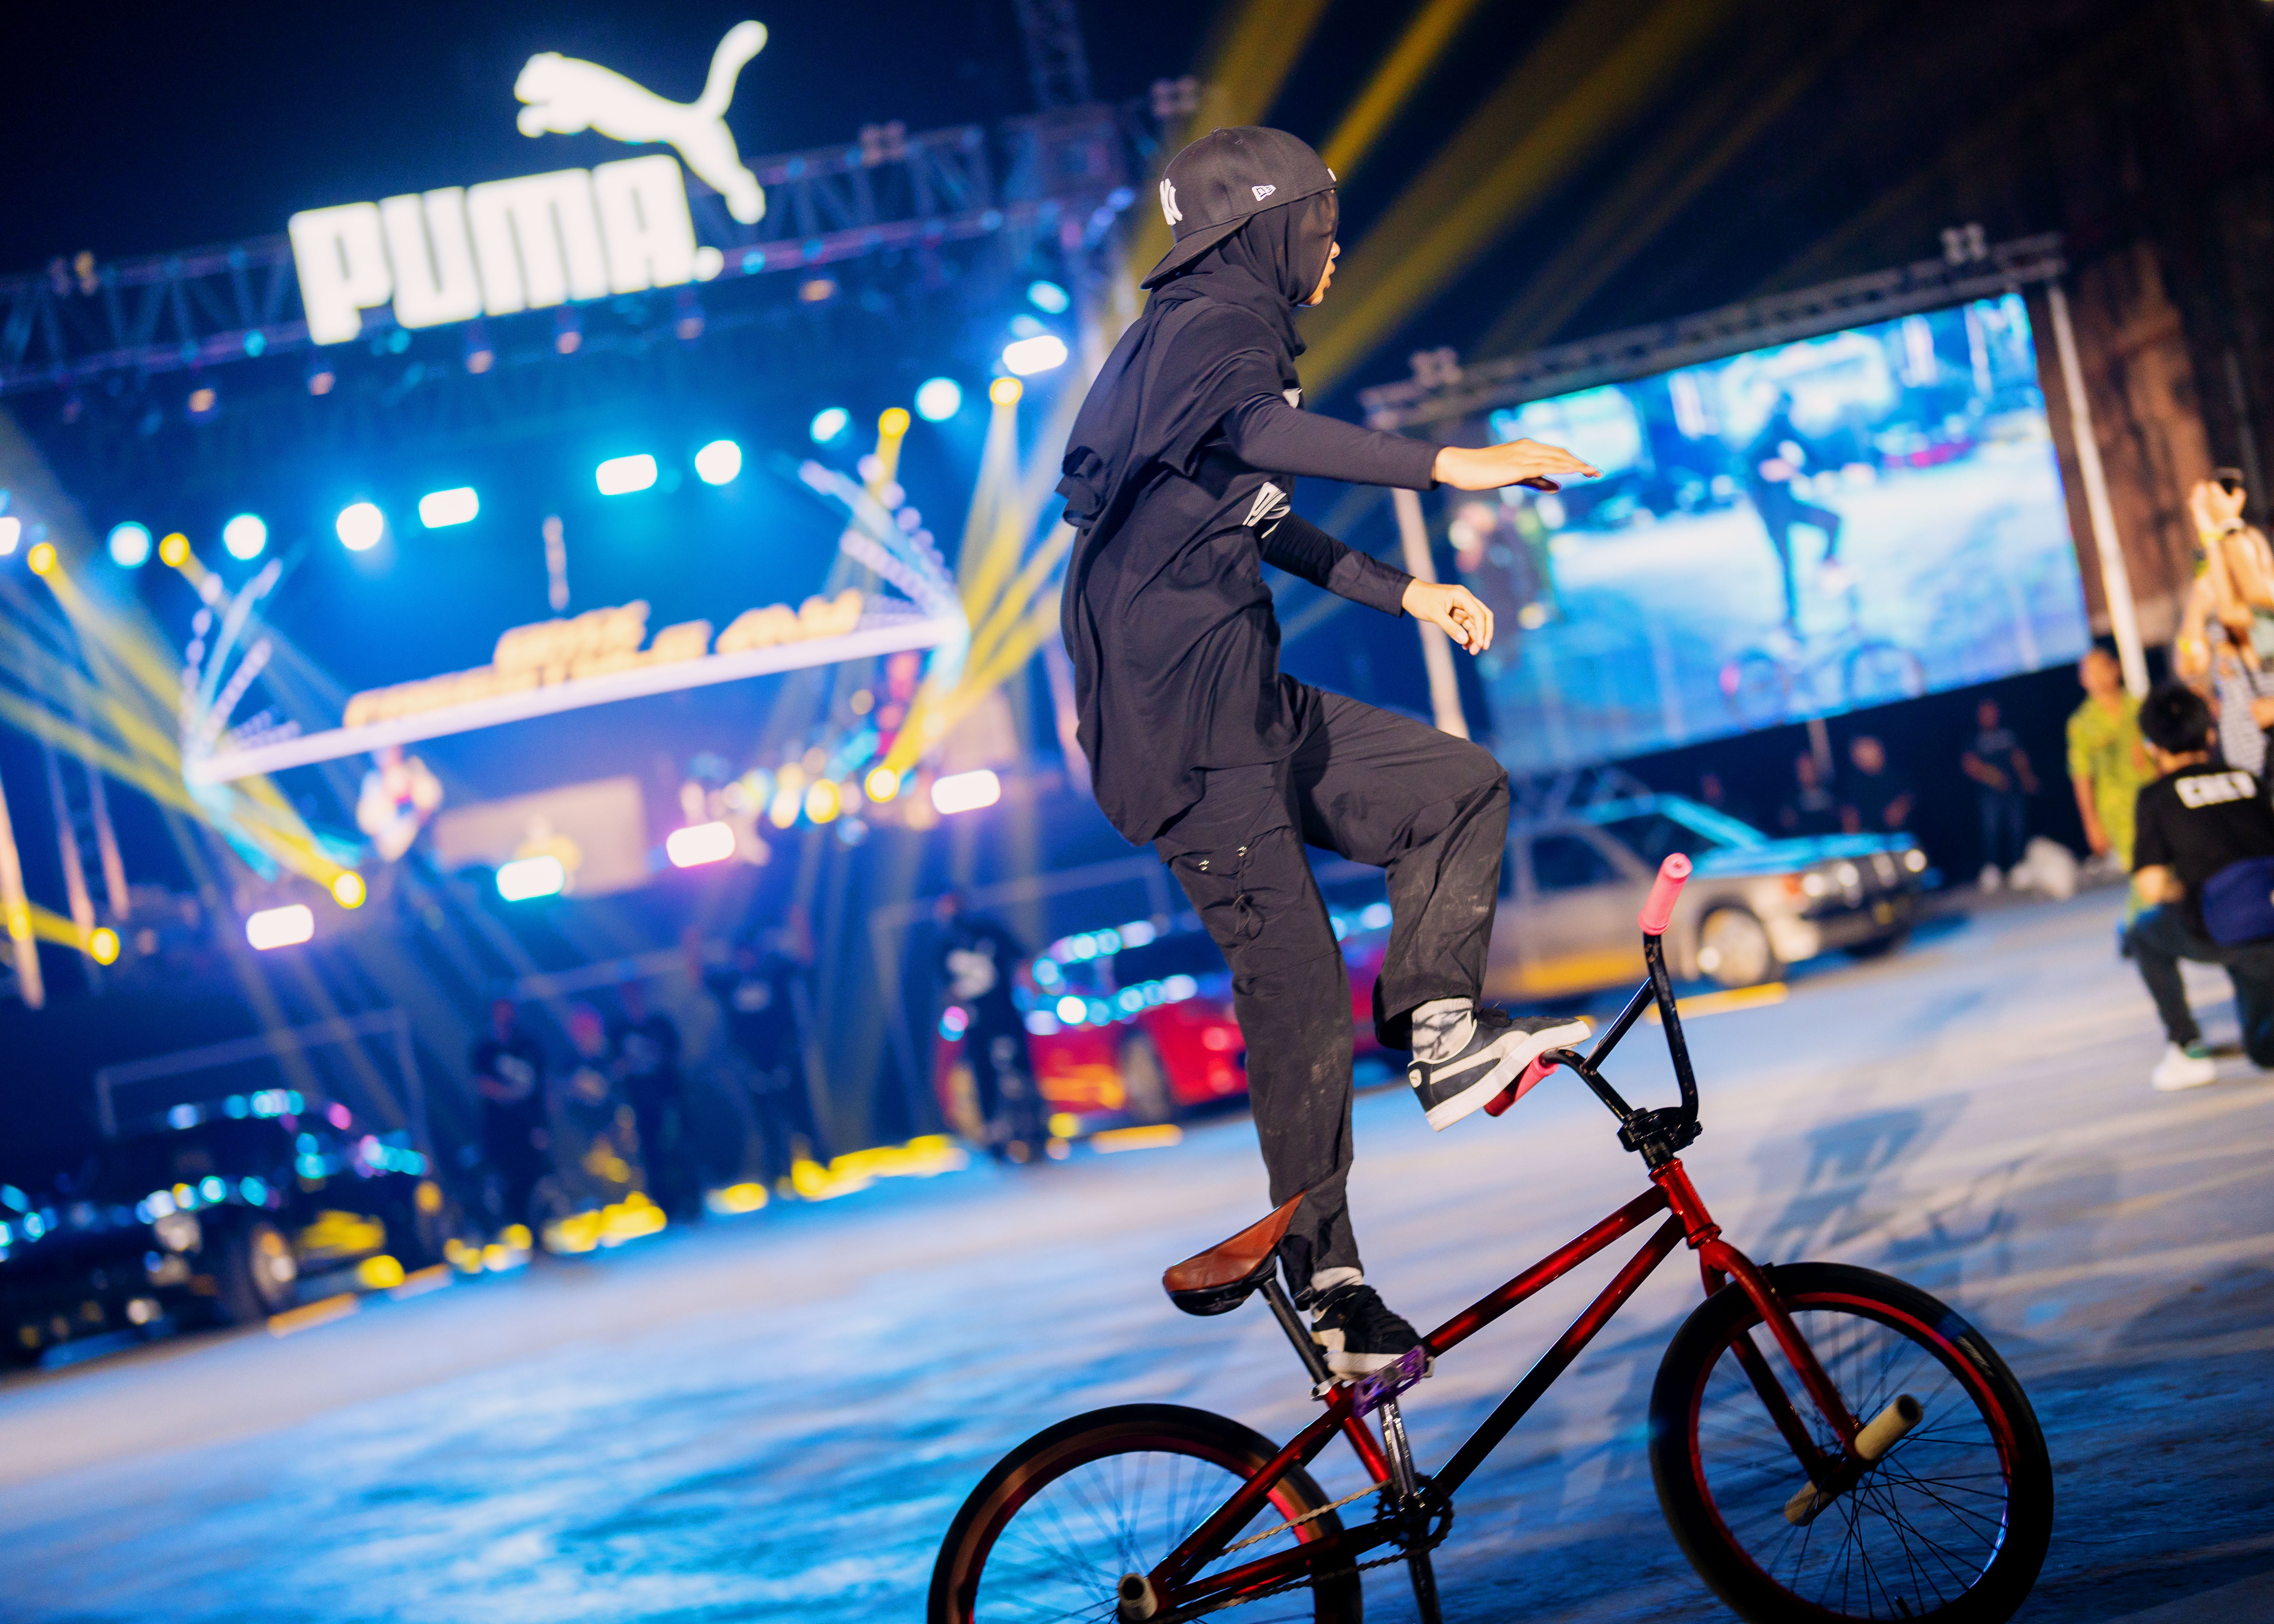 1. BMX Flatland Performers wow guests with gravity defying stunts